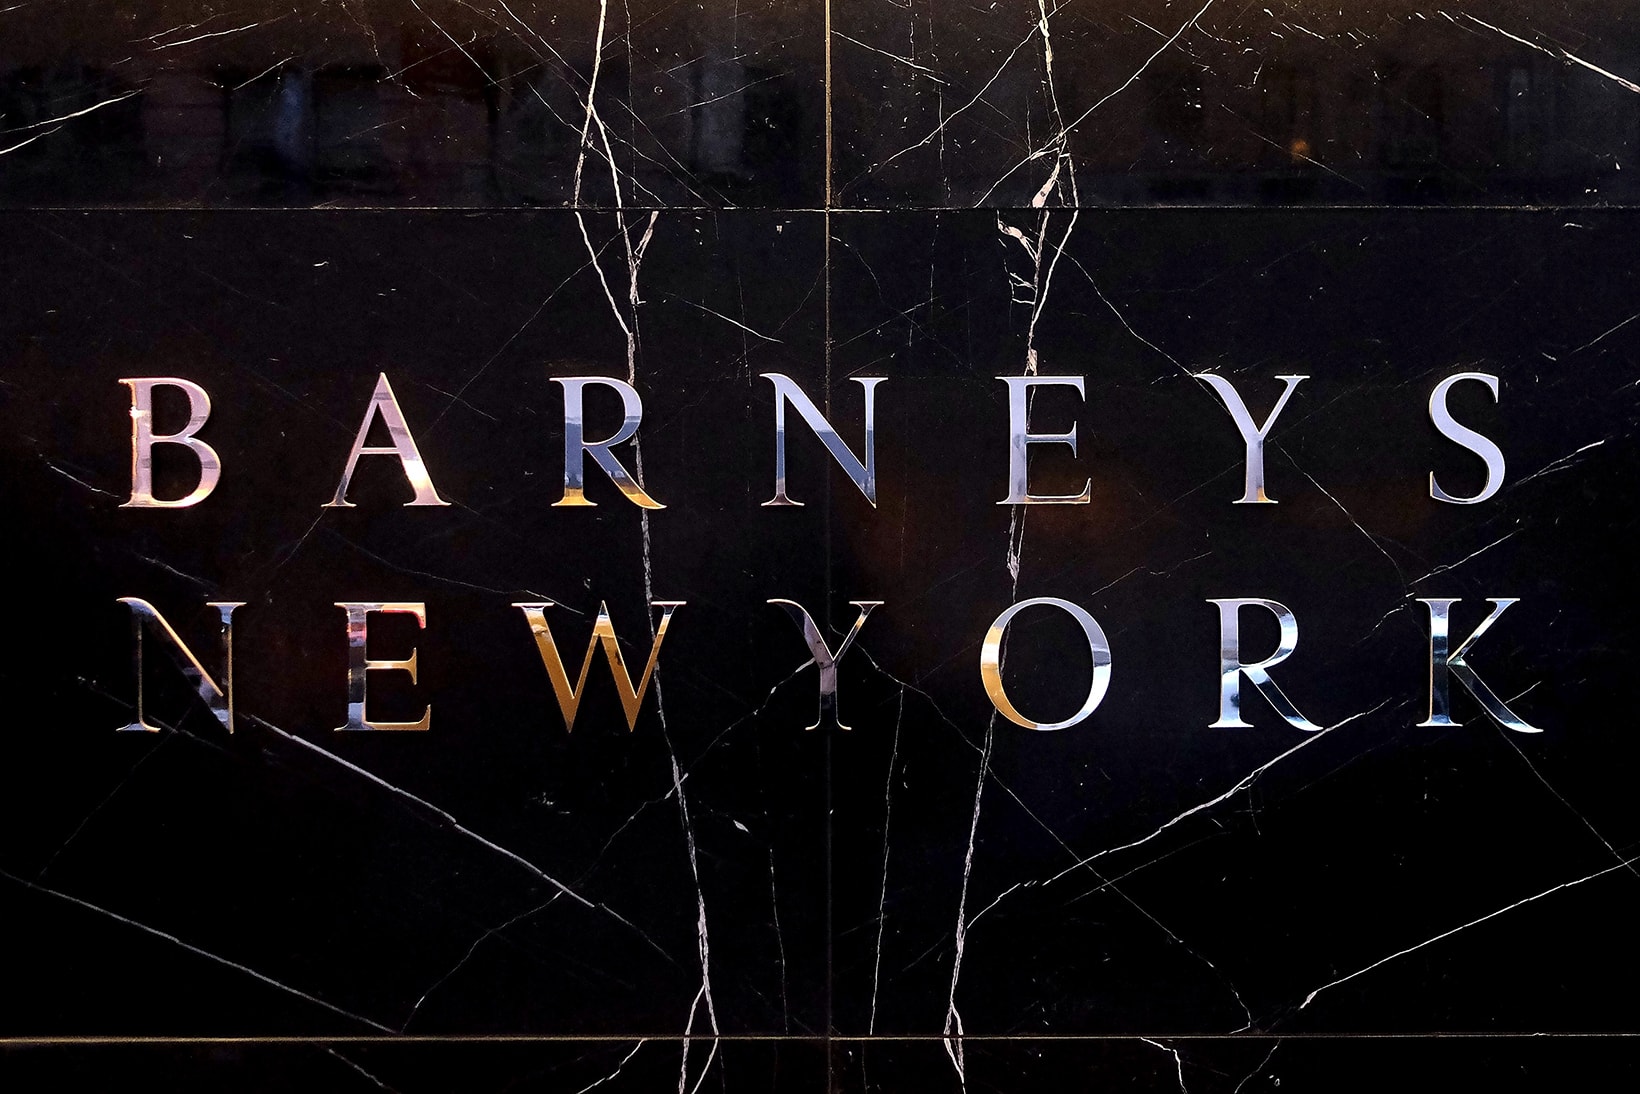 barneys new york city bankruptcy richard cayne perry madison avenue flagship retail debt businesses 